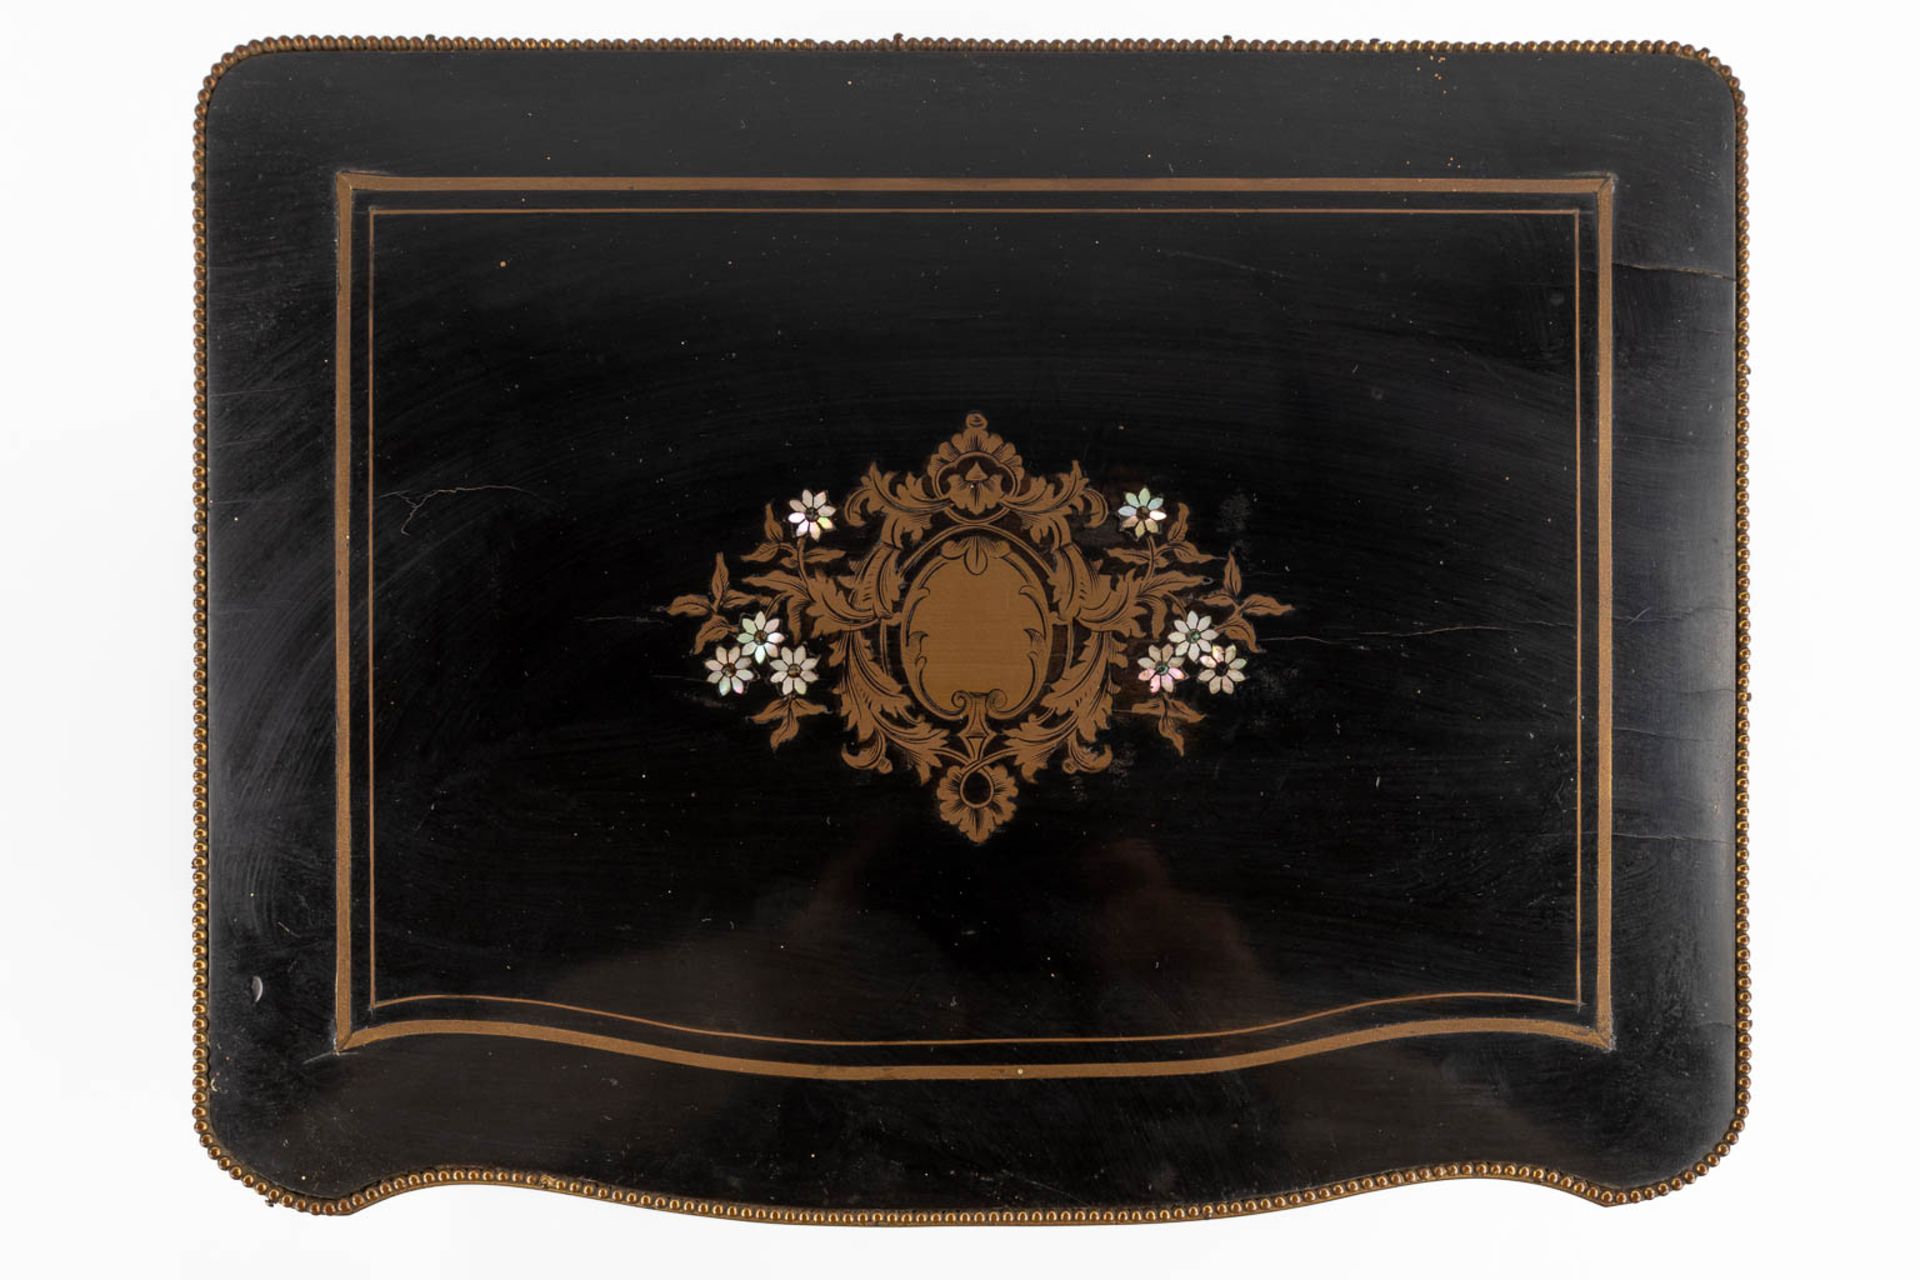 An antique Cave-à-liqueur, liquor box, ebonised wood inlaid with mother of pearl and copper. 19th C. - Image 8 of 16